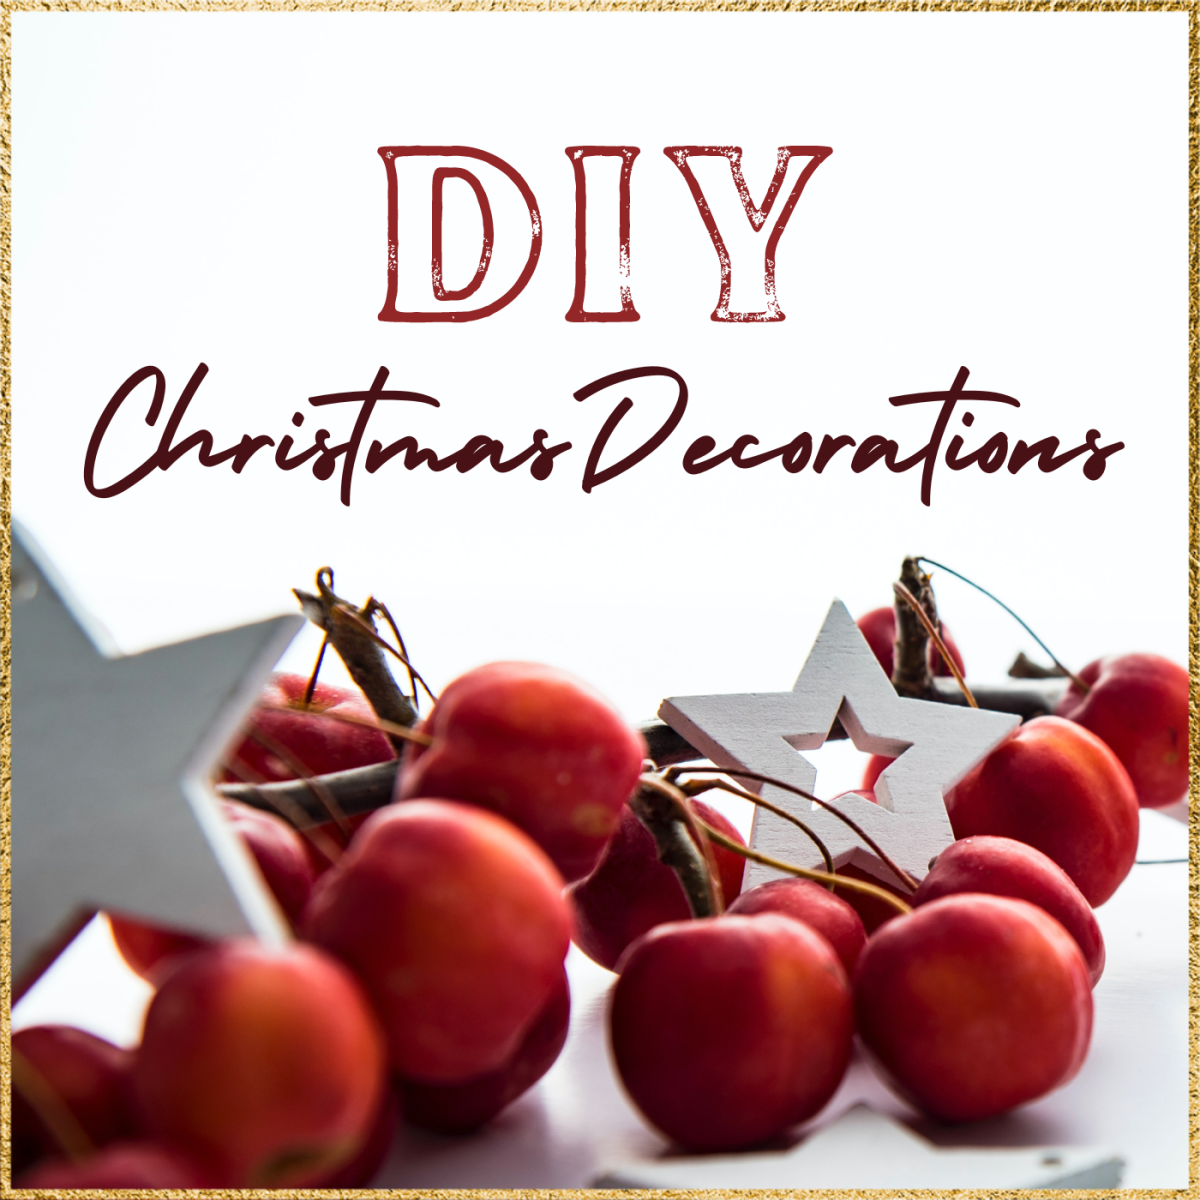 Easy DIY Christmas Decorations on a Budget That You'll Love